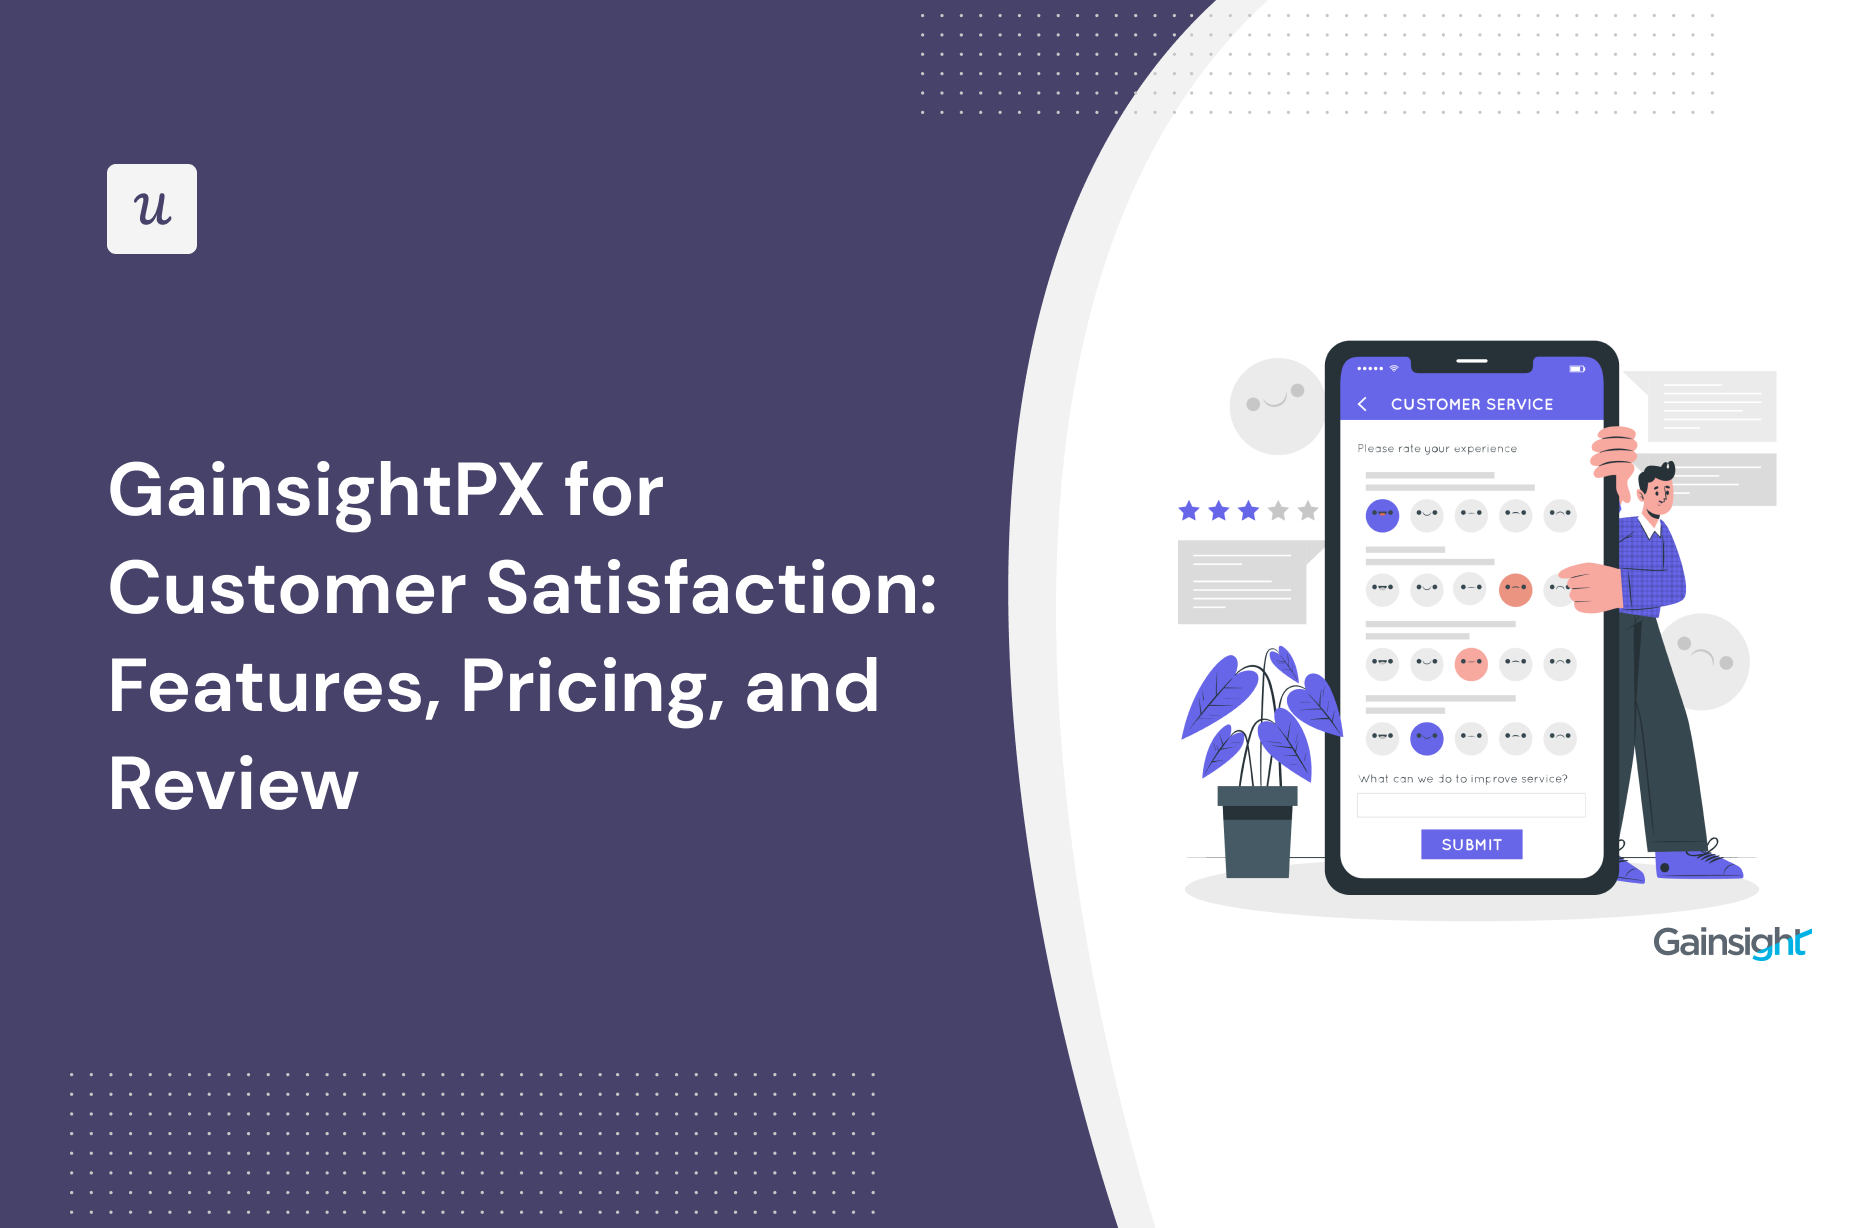 GainsightPX for Customer Satisfaction: Features, Pricing, and Review